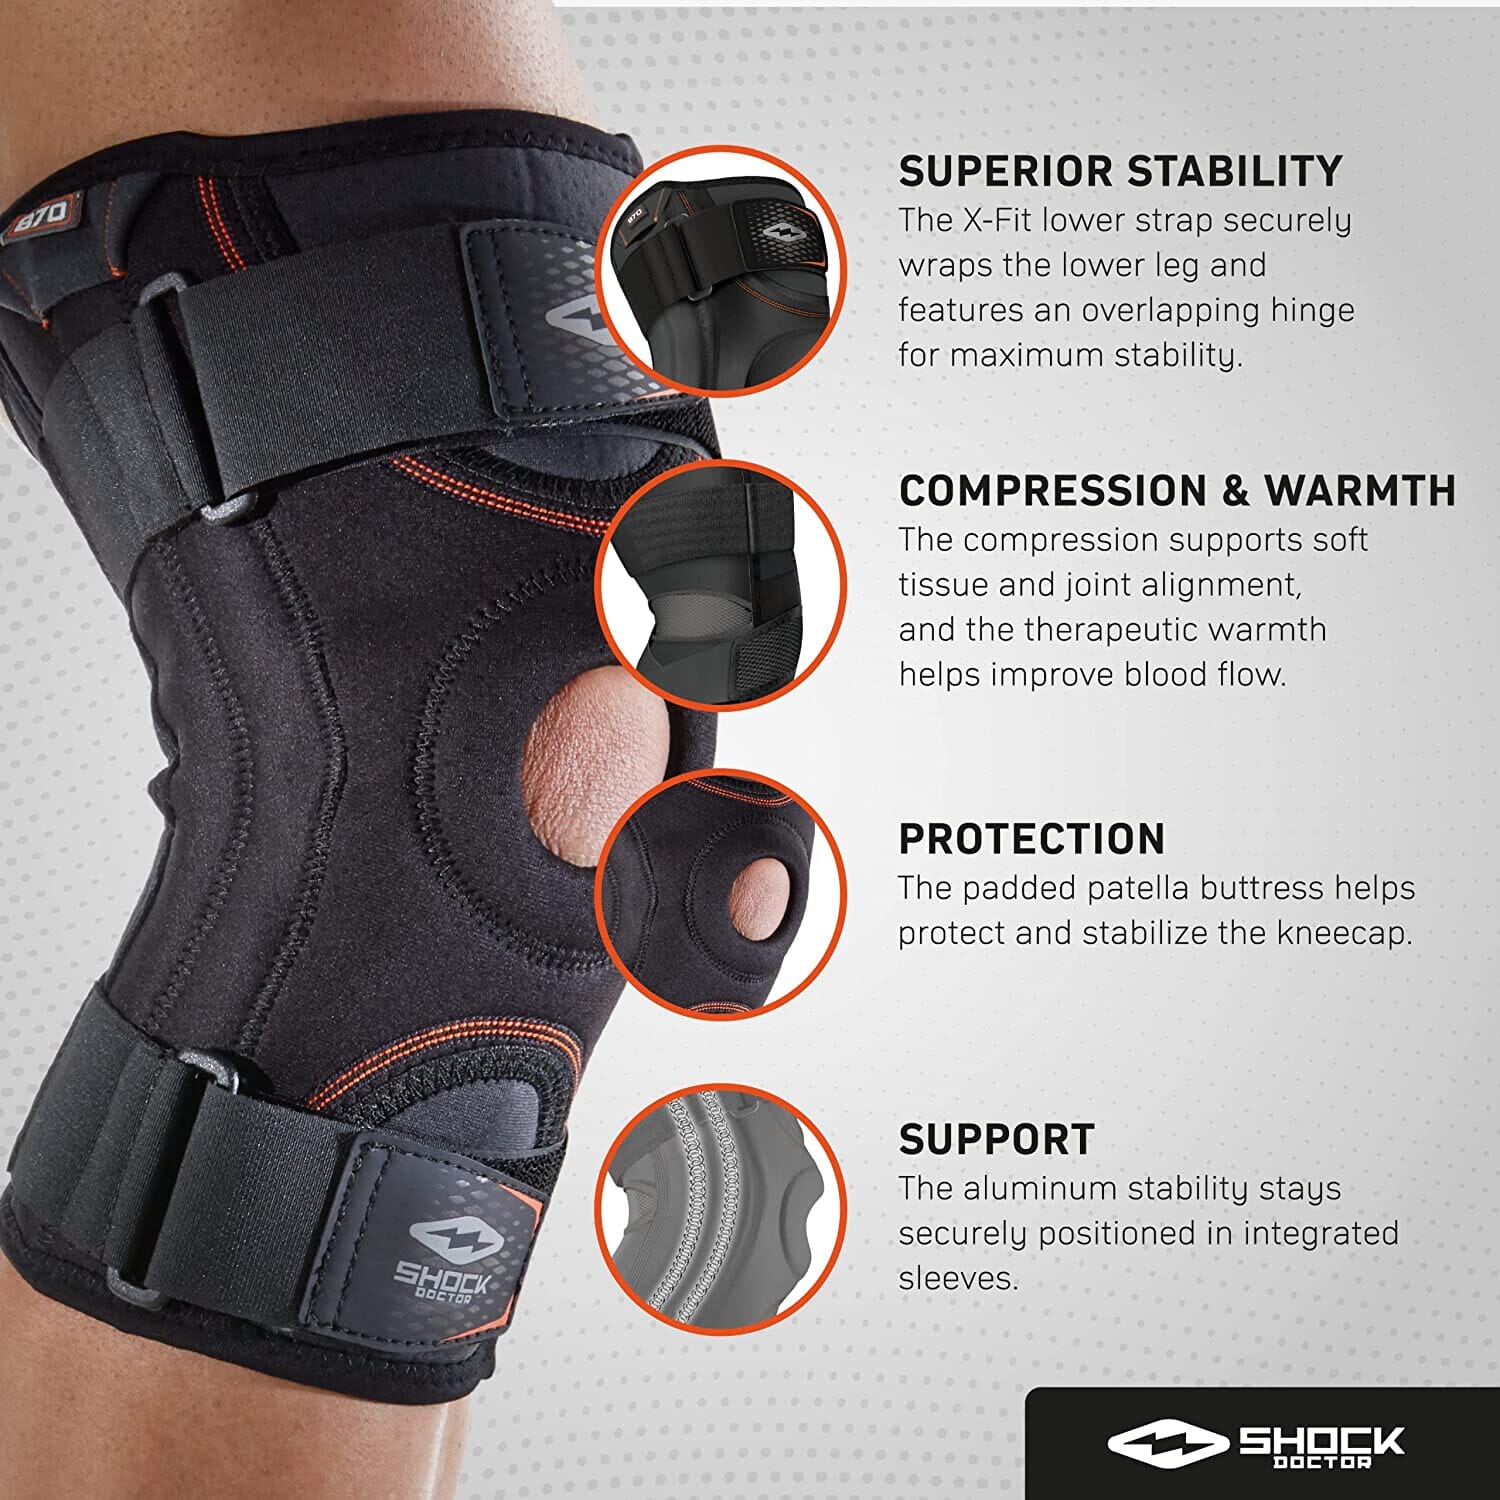 Knee Sleeve/4-Way Elastic with Gel Buttress And Stays